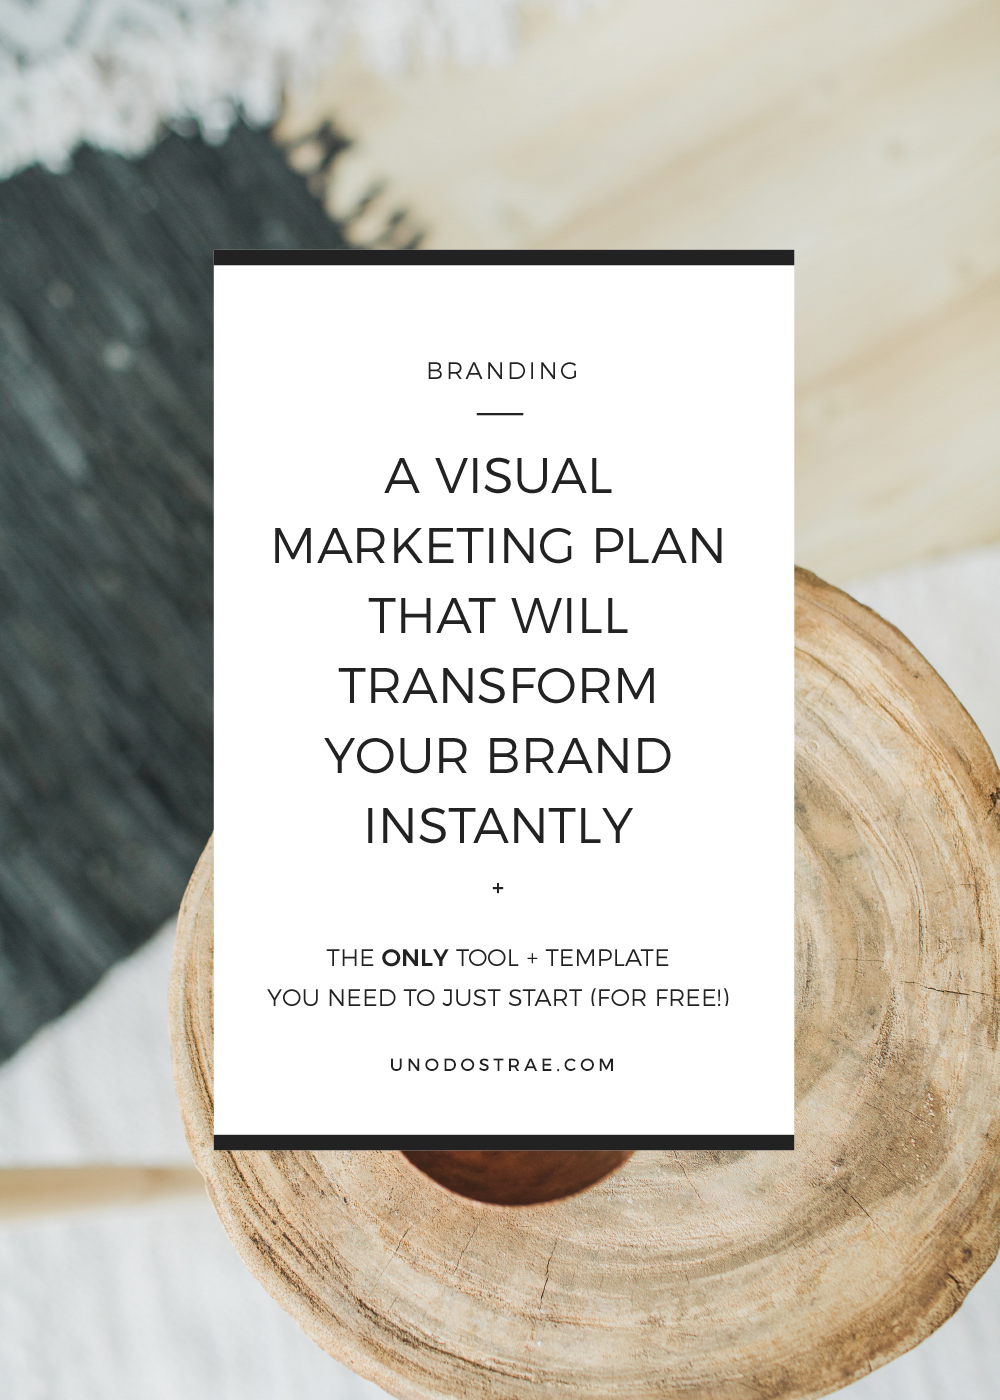 How to use this visual marketing plan to revamp your branding instantly (+ 2 free downloads to help you start today) | unodostrae.com